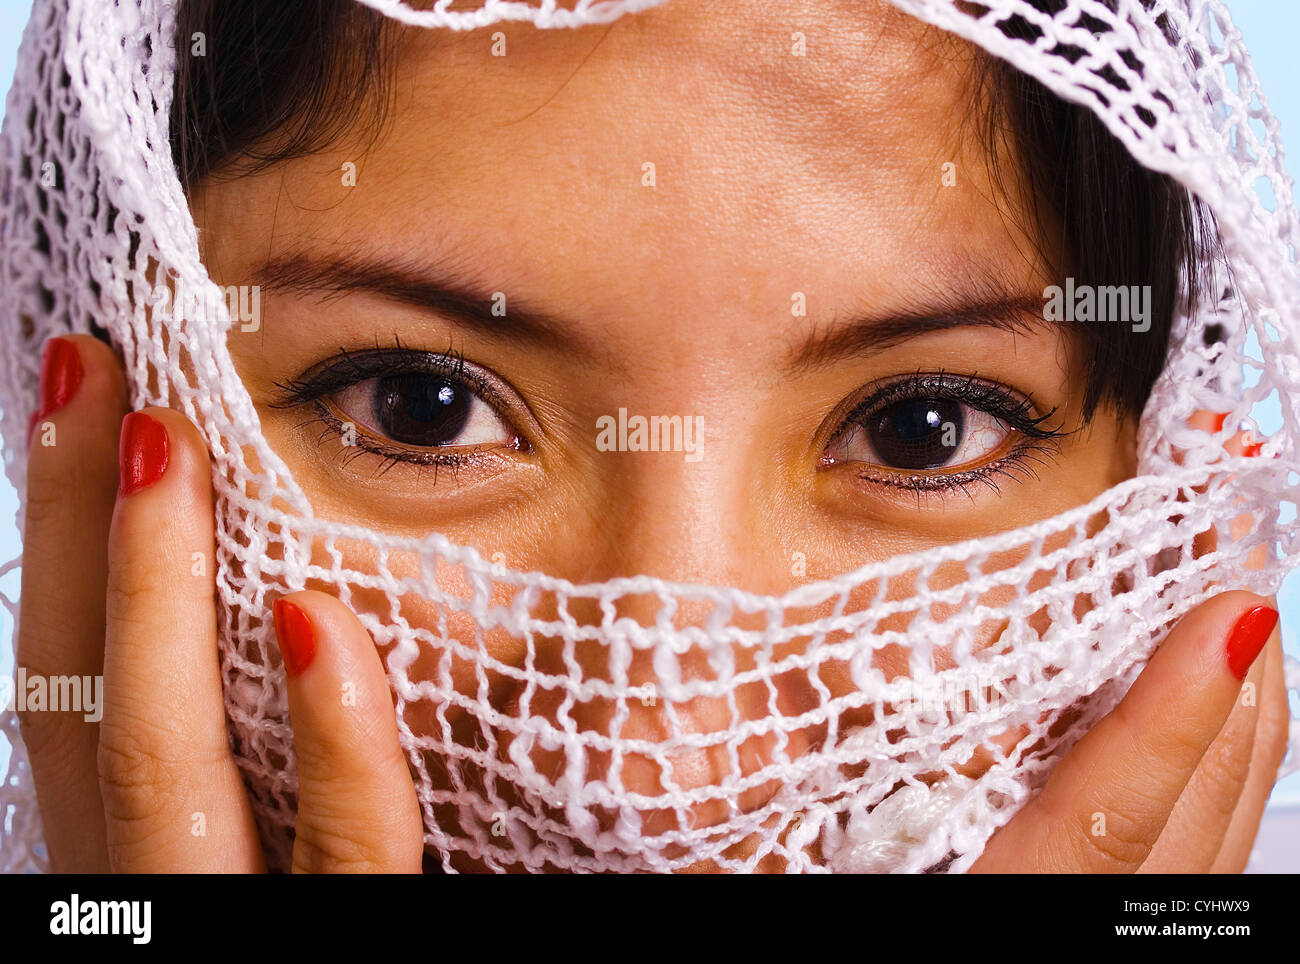 Muslim Woman With A White Cloth Veil Over Her Face Stock Photo